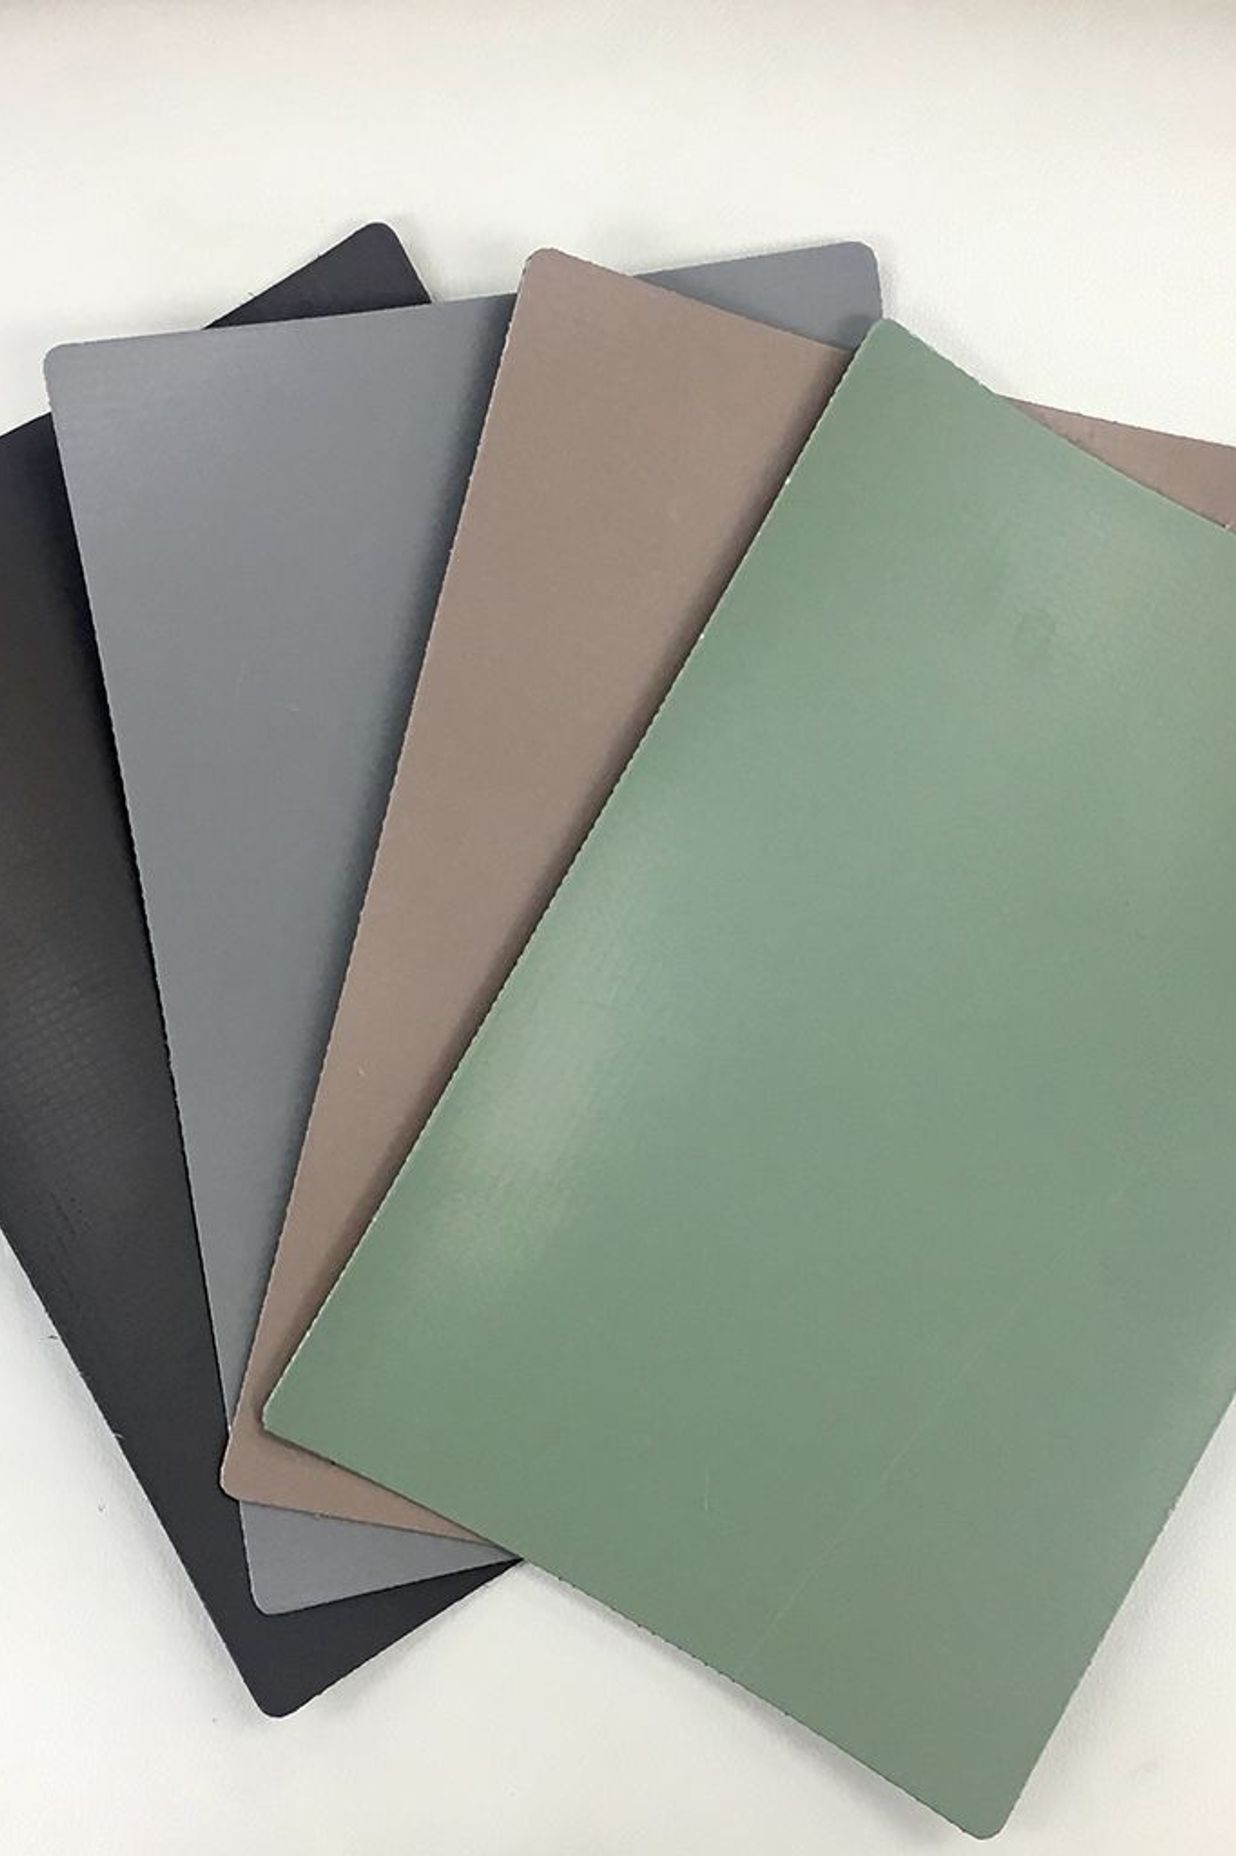 Four new colours: Mansard Brown, Rock Brown, Patina Green and Slate Grey